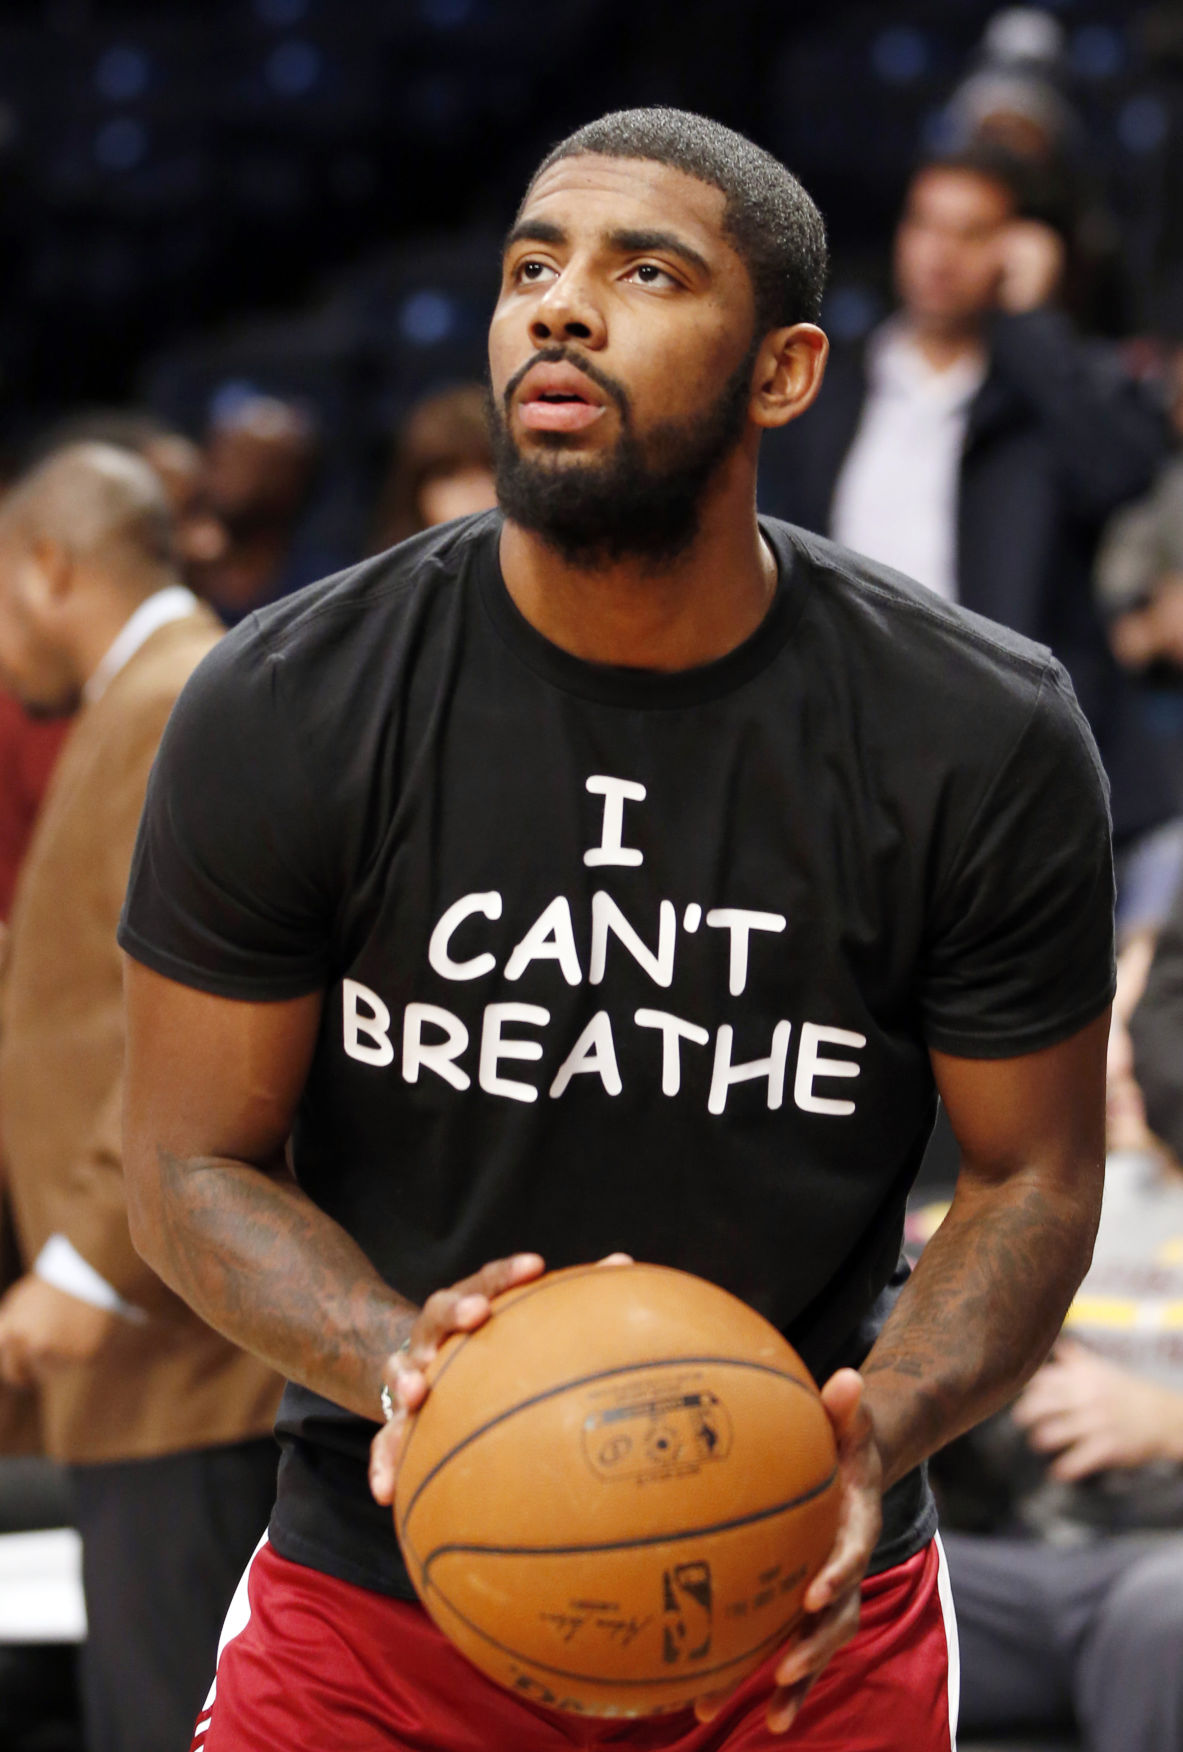 Lebron James Other Nba Players Wear I Can T Breathe Shirts